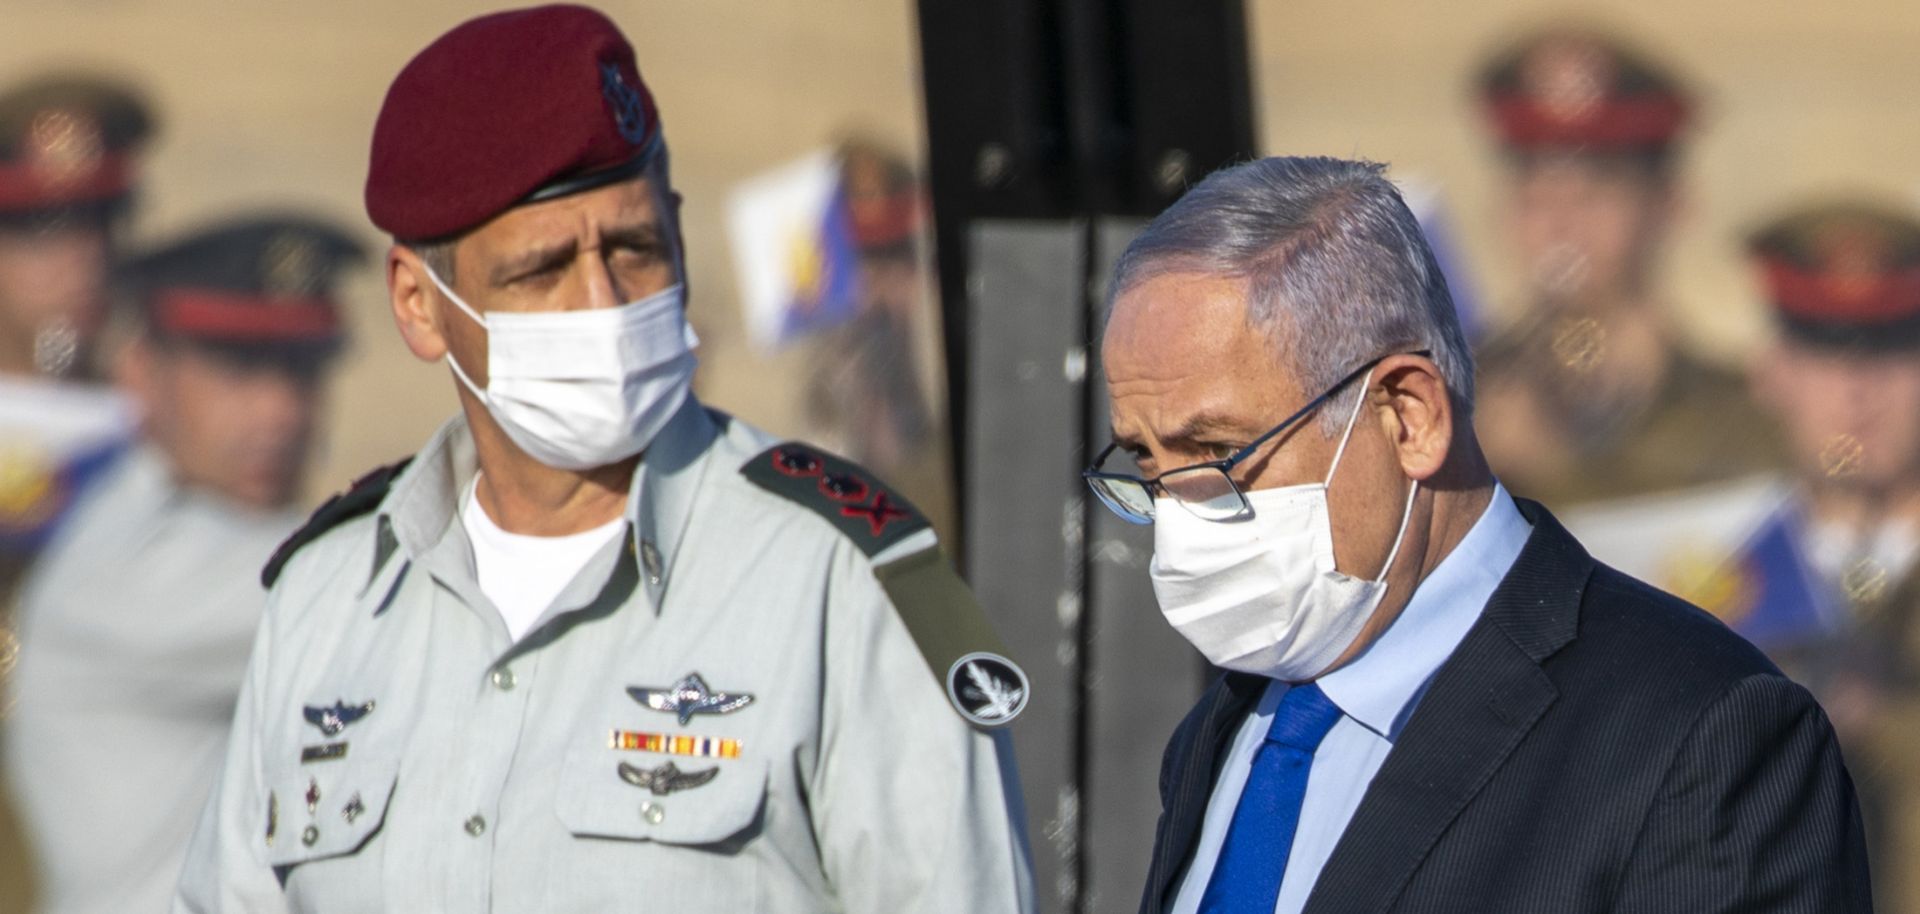 Israeli Prime Minister Benjamin Netanyahu (right) and military chief Lt. Gen. Aviv Kochavi attend a graduation ceremony for new pilots at an air force base near the southern Israeli city of Beersheba on June 25, 2020. 